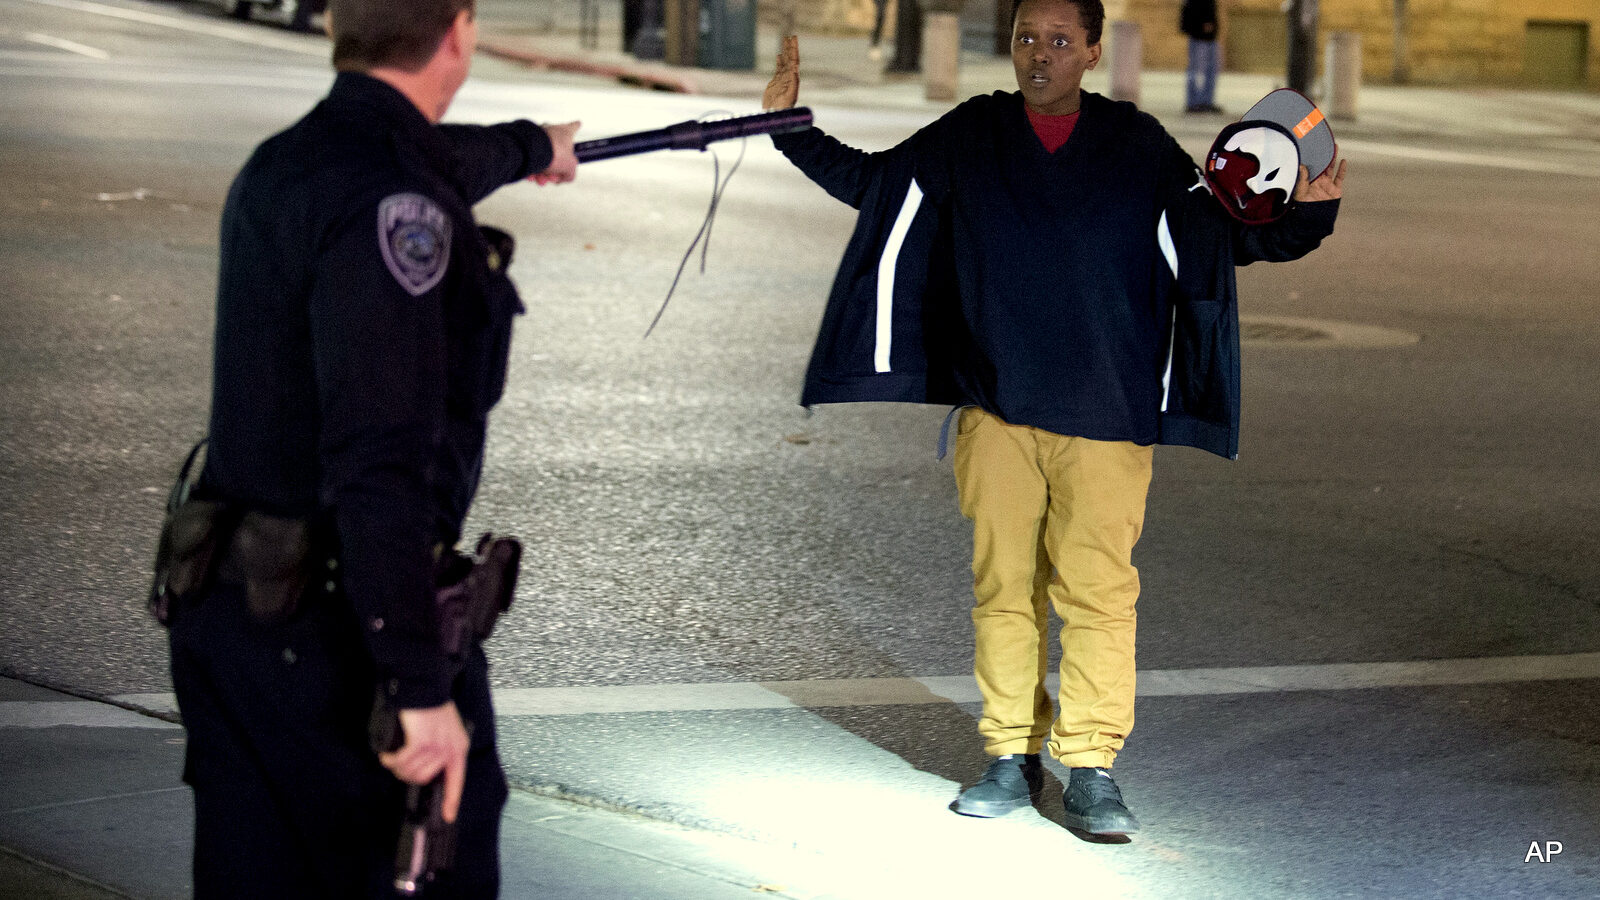 Police stop a person as he walks away from a crowd that formed after an officer-involved shooting at on South Rio Grande Street in Salt Lake City. Salt Lake County District Attorney Sim Gill said officers acted appropriately when they fired at Abdullahi "Abdi" Mohamed because police believed he was about to seriously injure or kill a man with a metal broom handle.